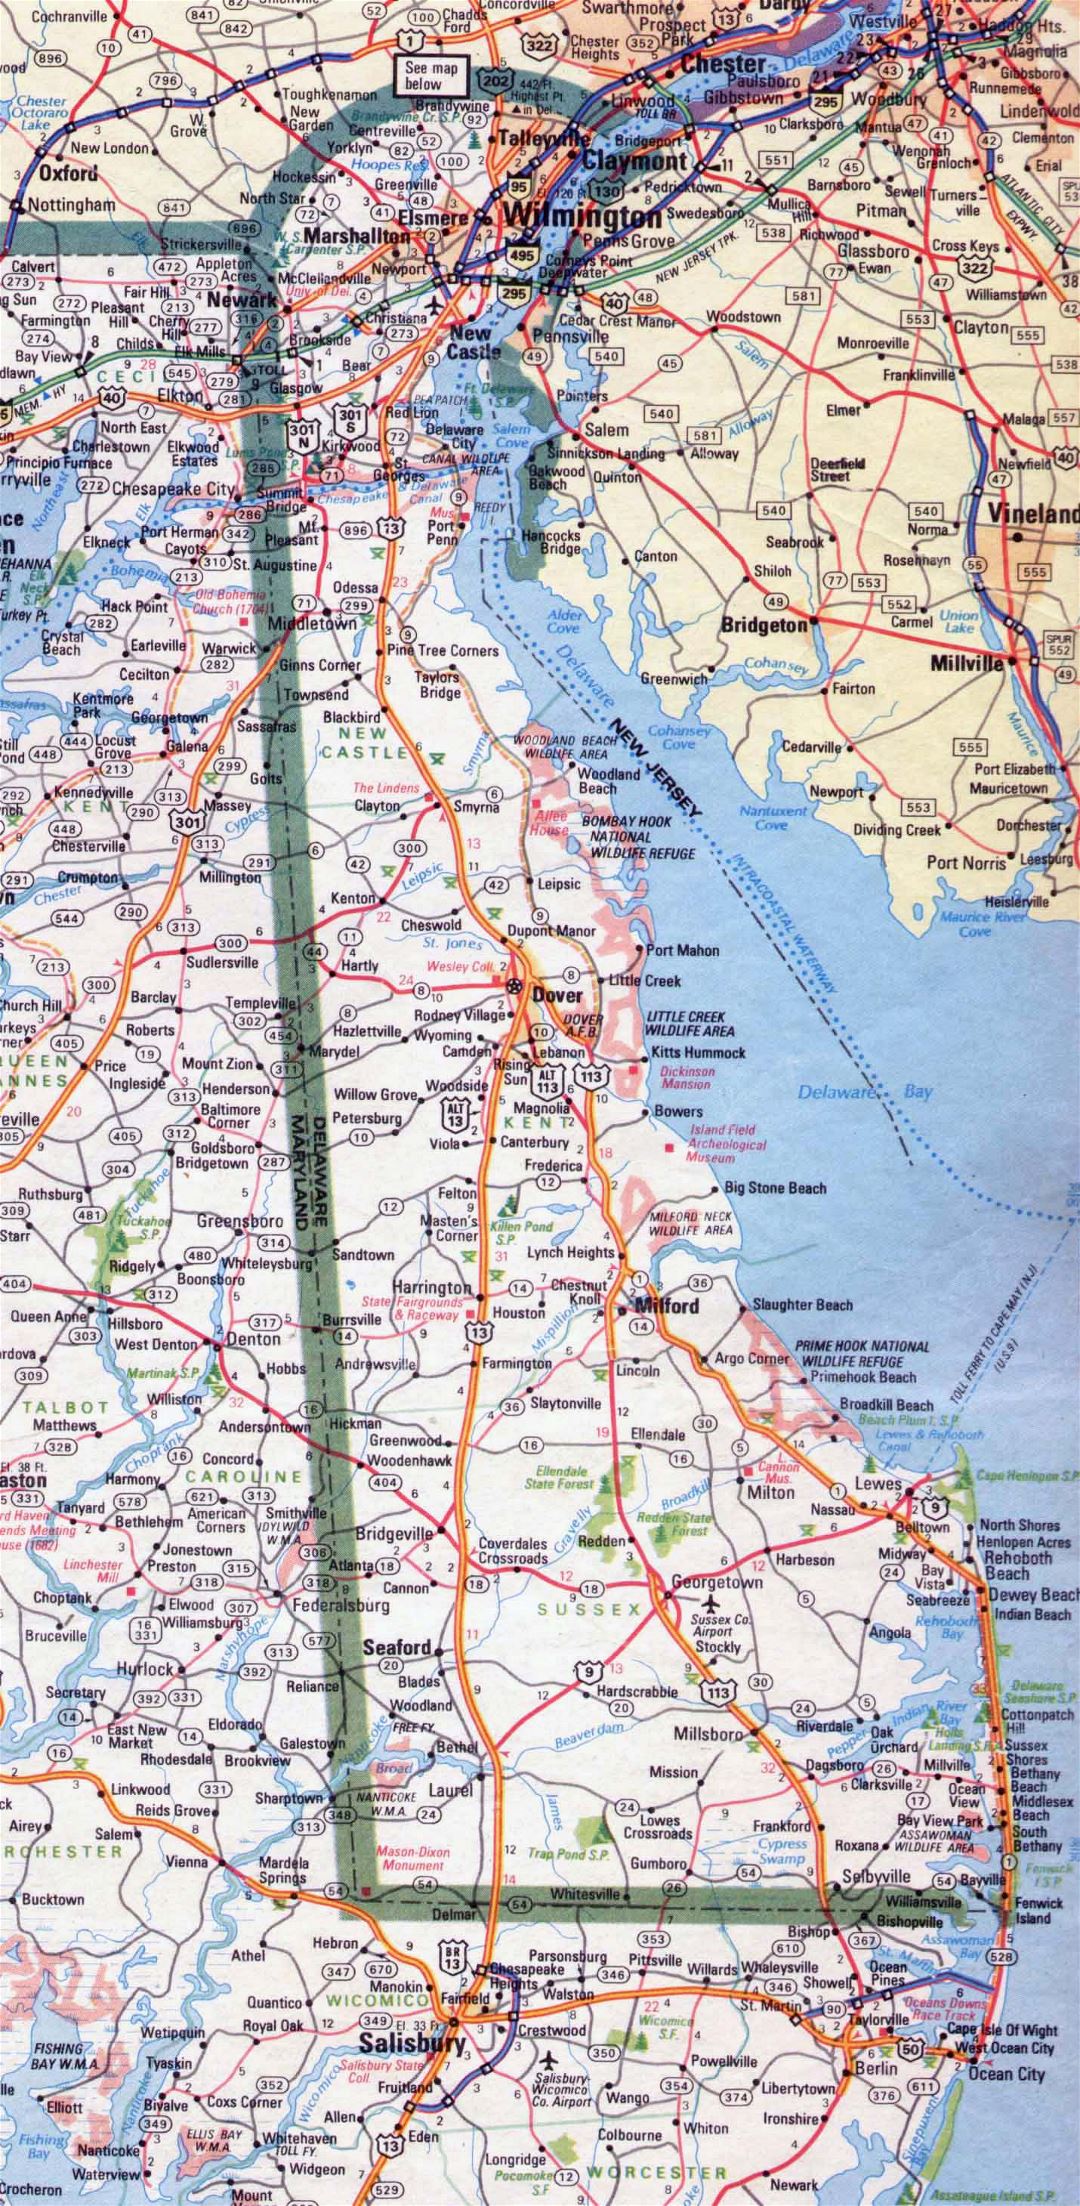 Large roads and highways map of Delaware state - 1983